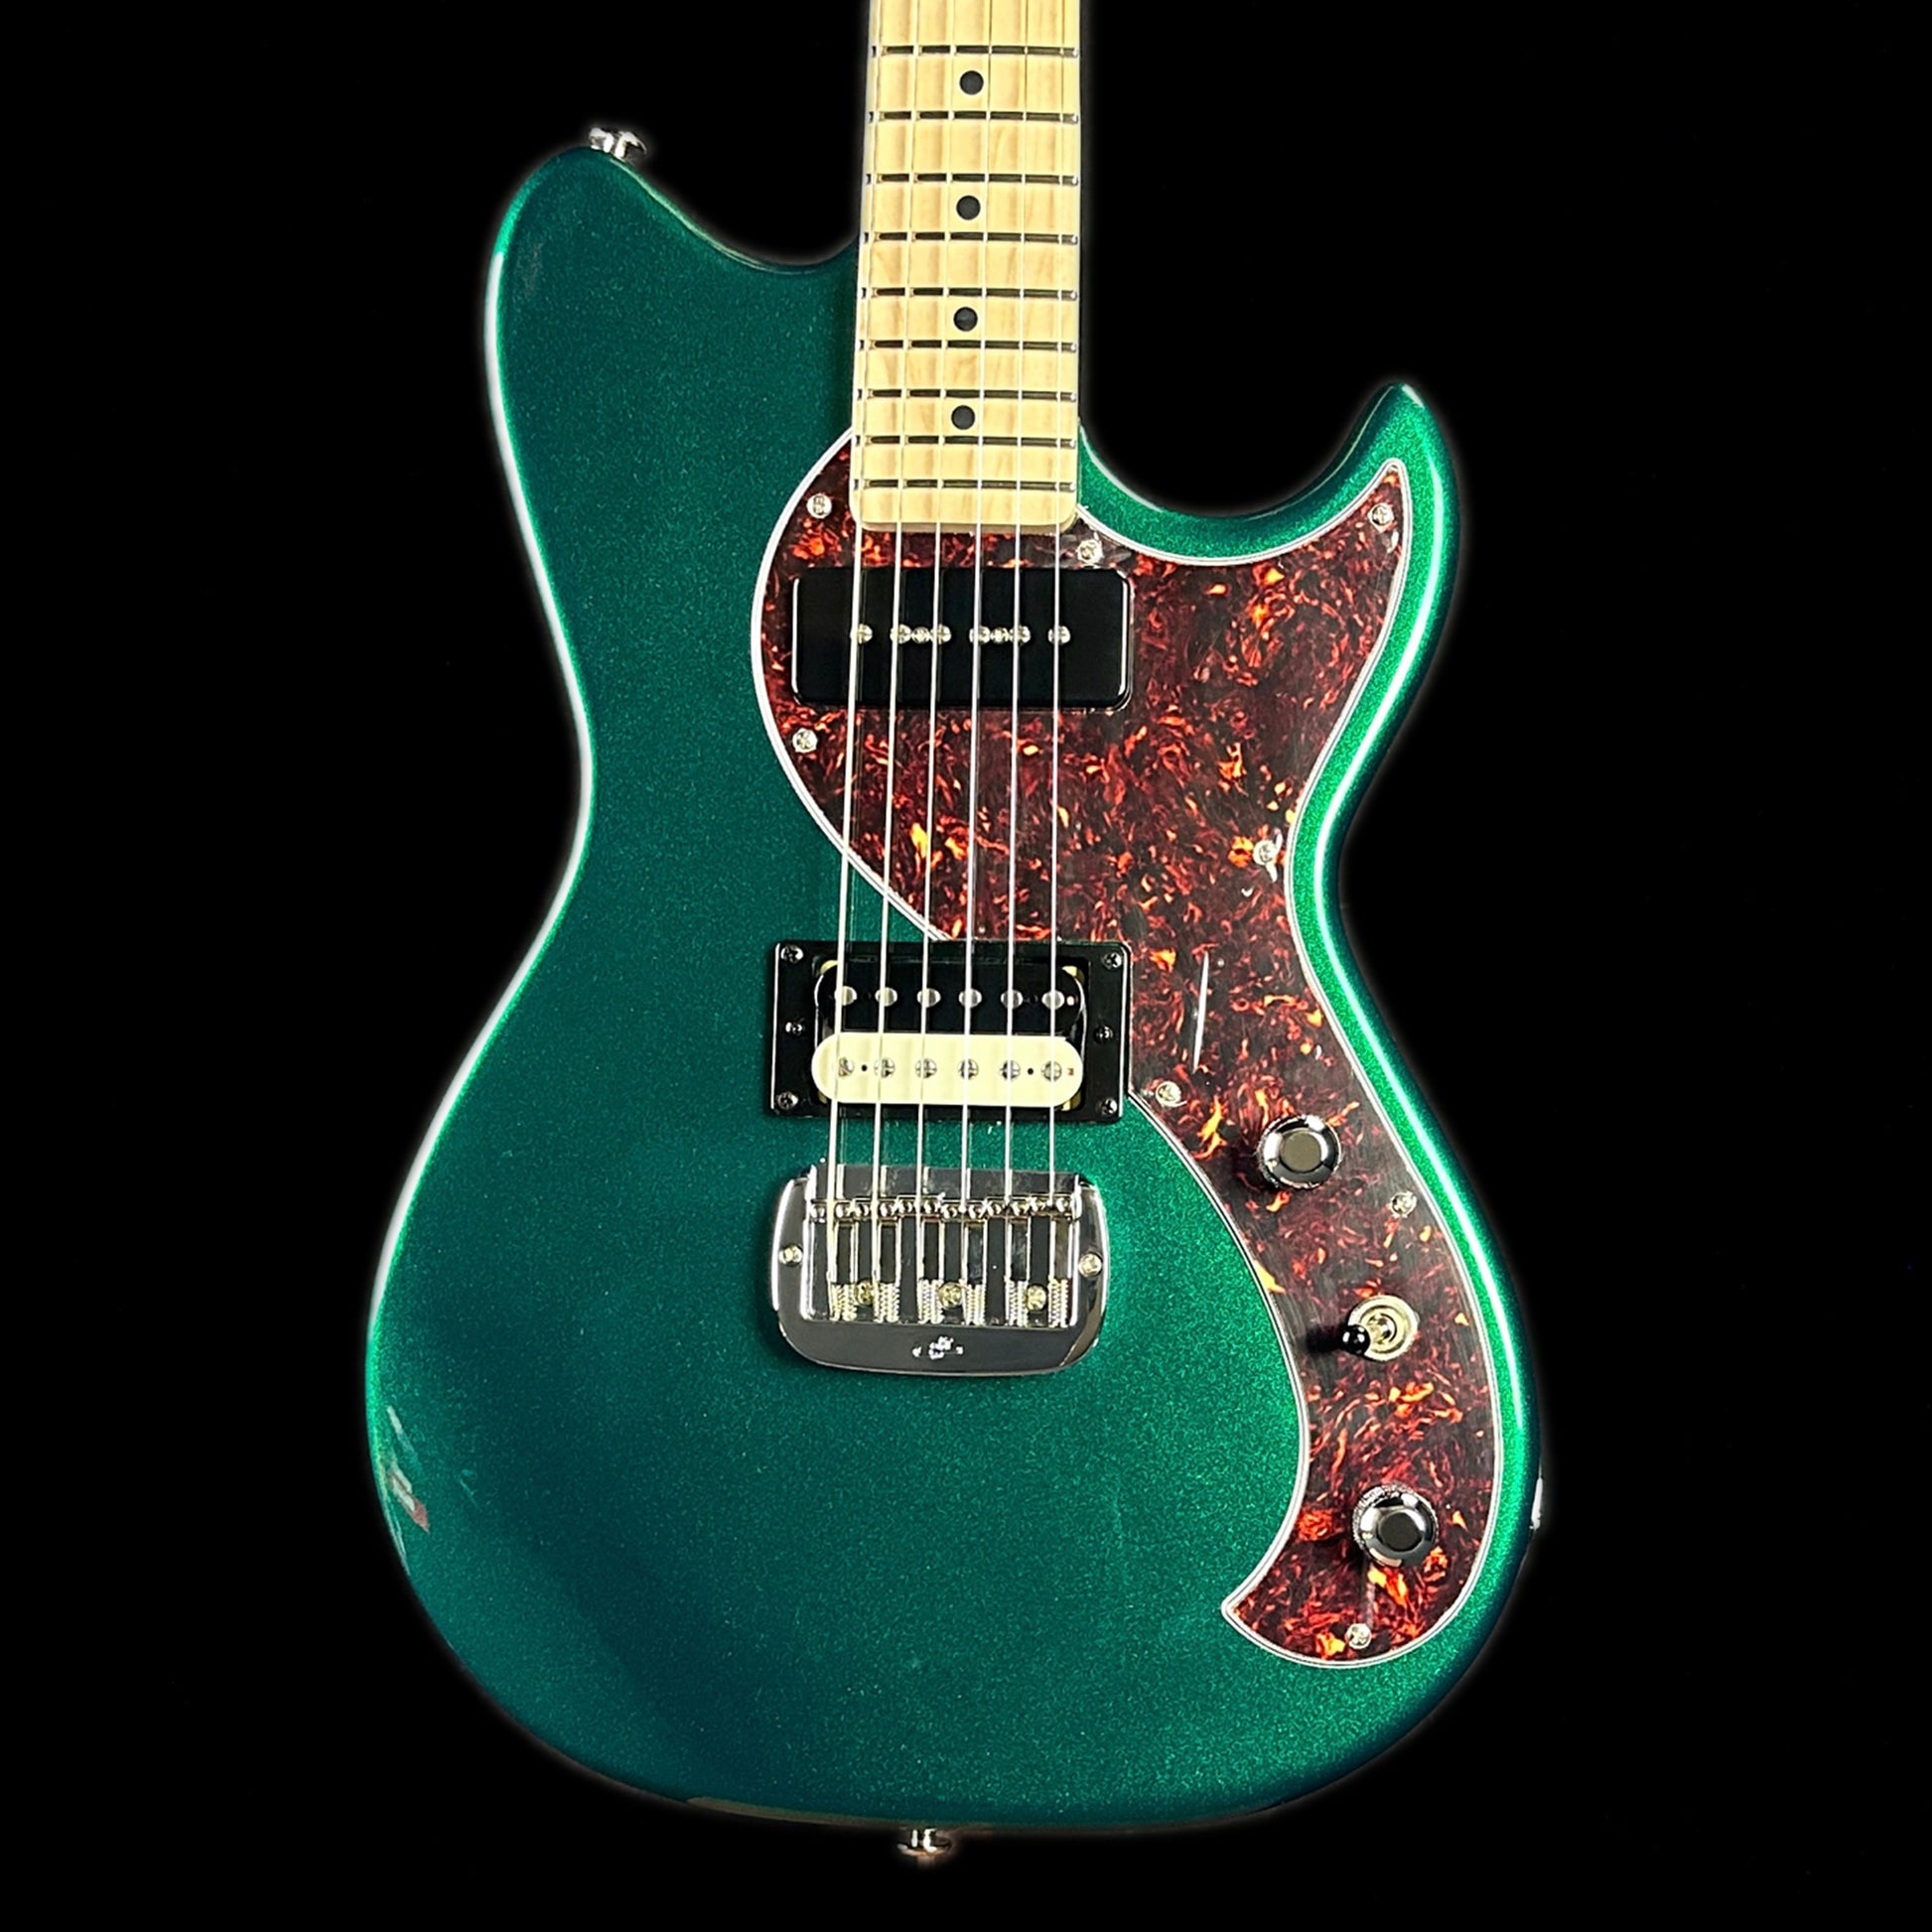 Front of body of G&L USA Fallout MP Emerald Green Metallic.